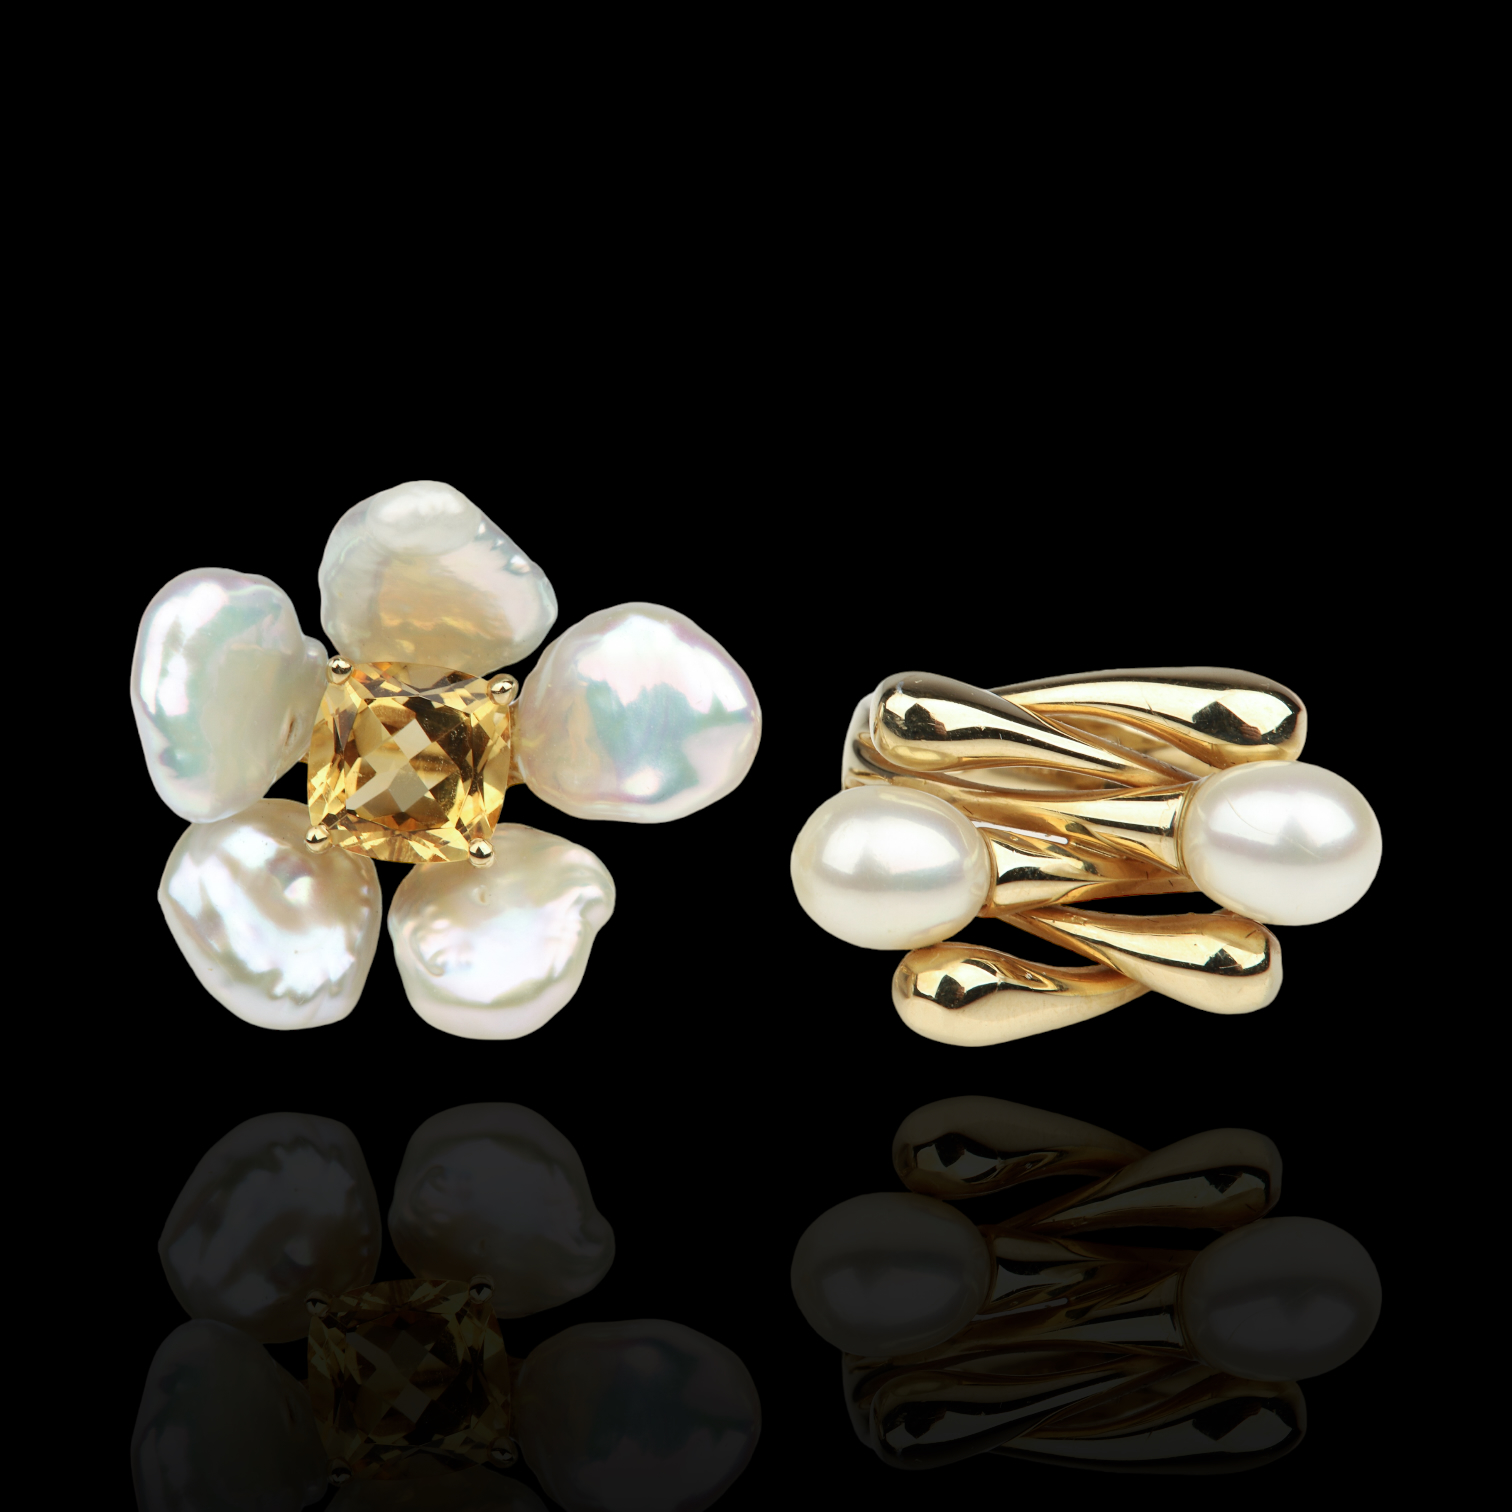  2 14K yellow gold and pearl rings 3b3a14